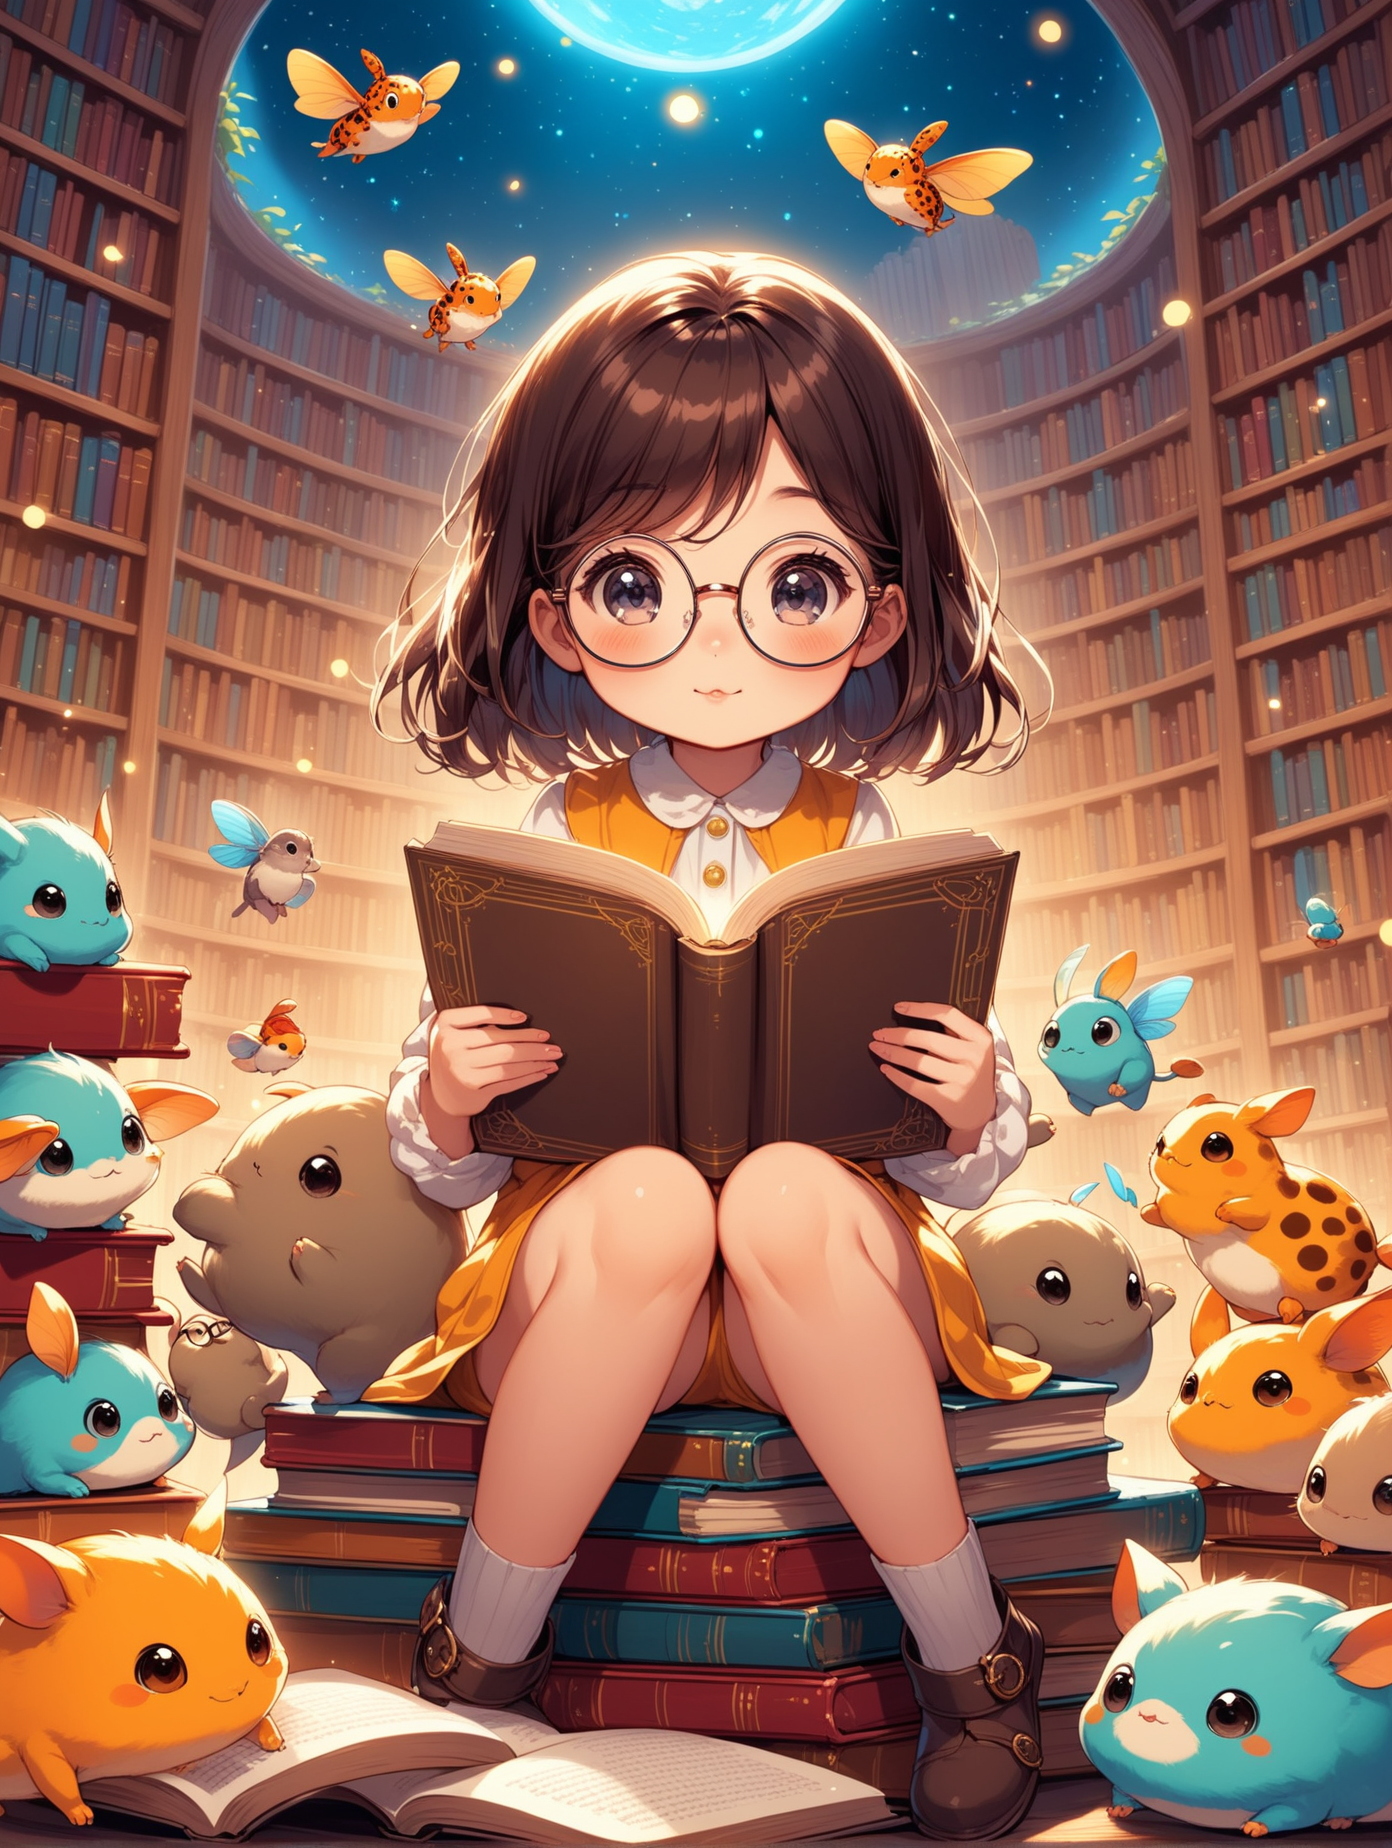 a cute little cartoon girl wearing big round glasses, surrounded by little creatures, reading a book, and sitting on different books in a fantasy library